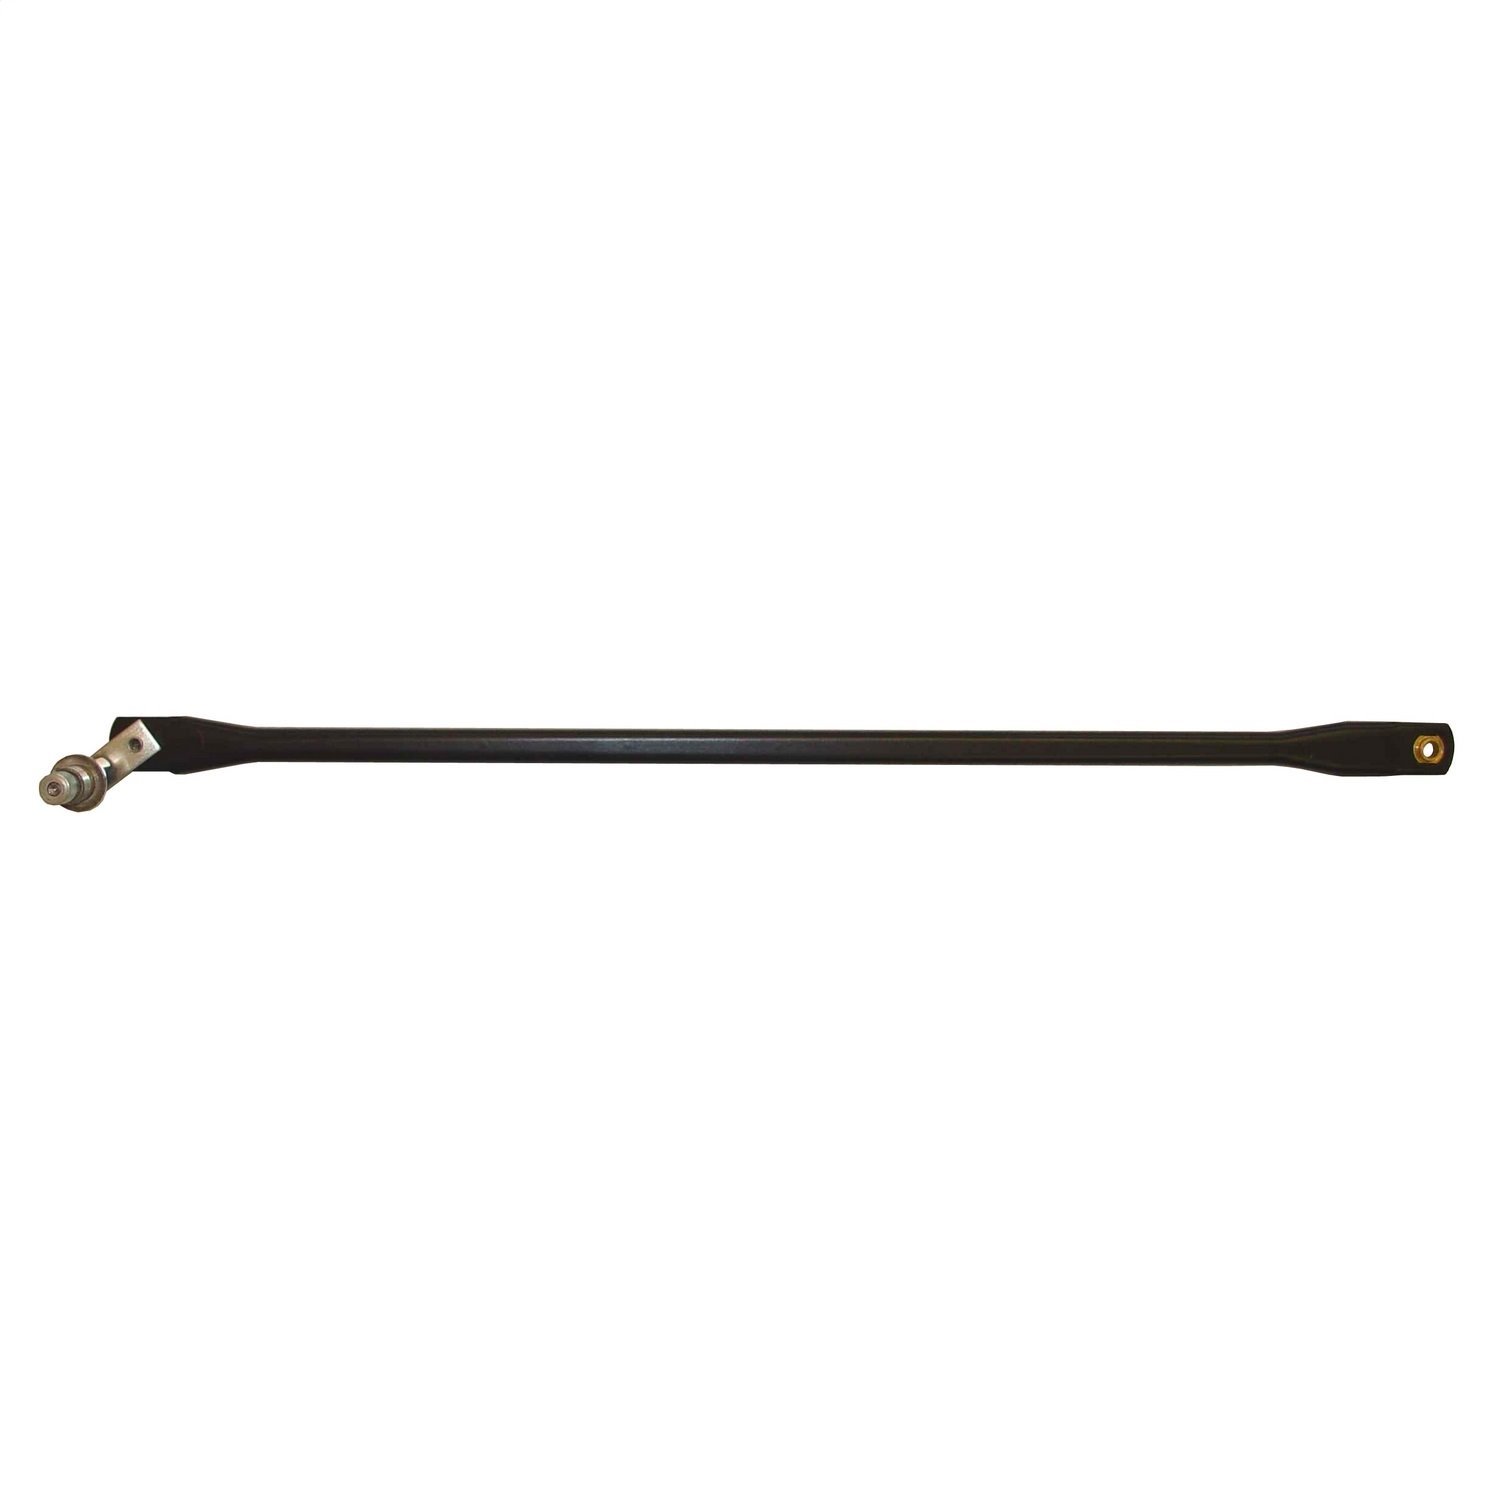 This wiper pivot and 25 inch arm from